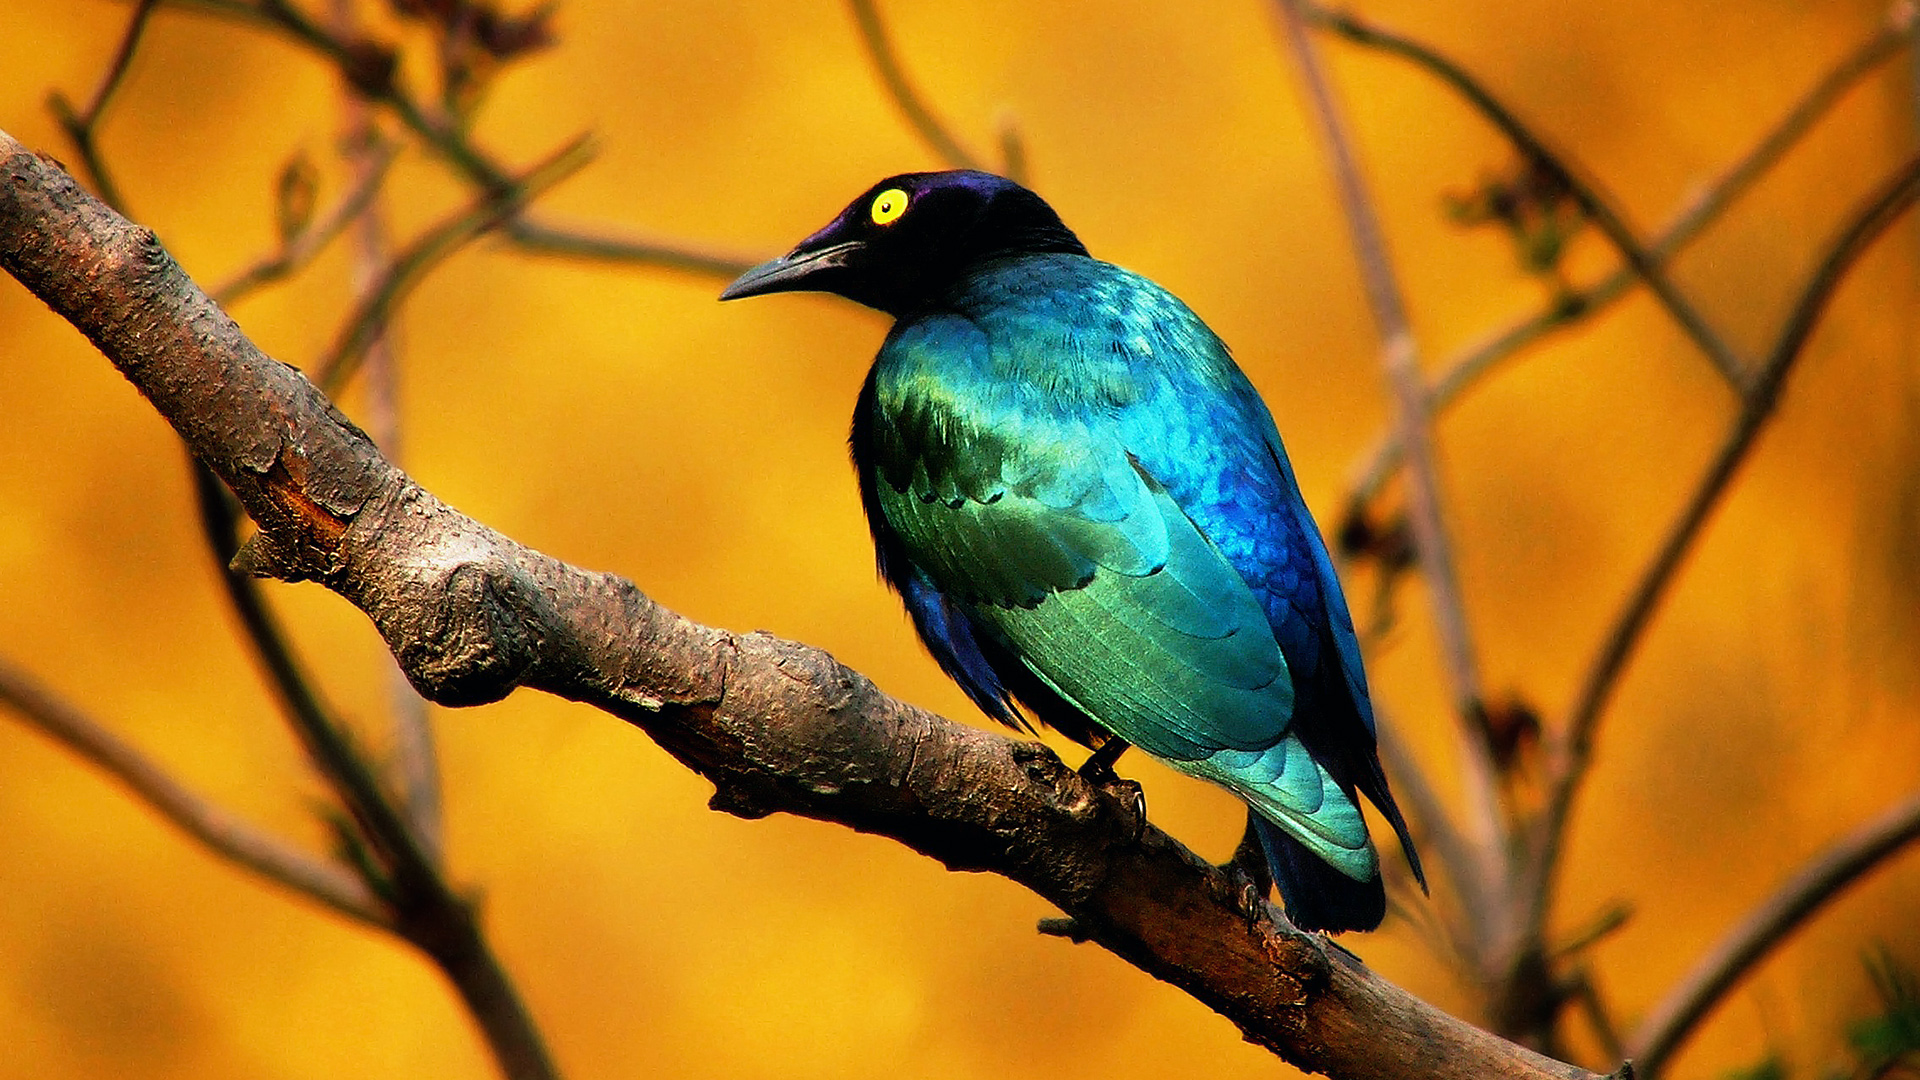 Birds Backgrounds free download | Wallpapers, Backgrounds, Images ...